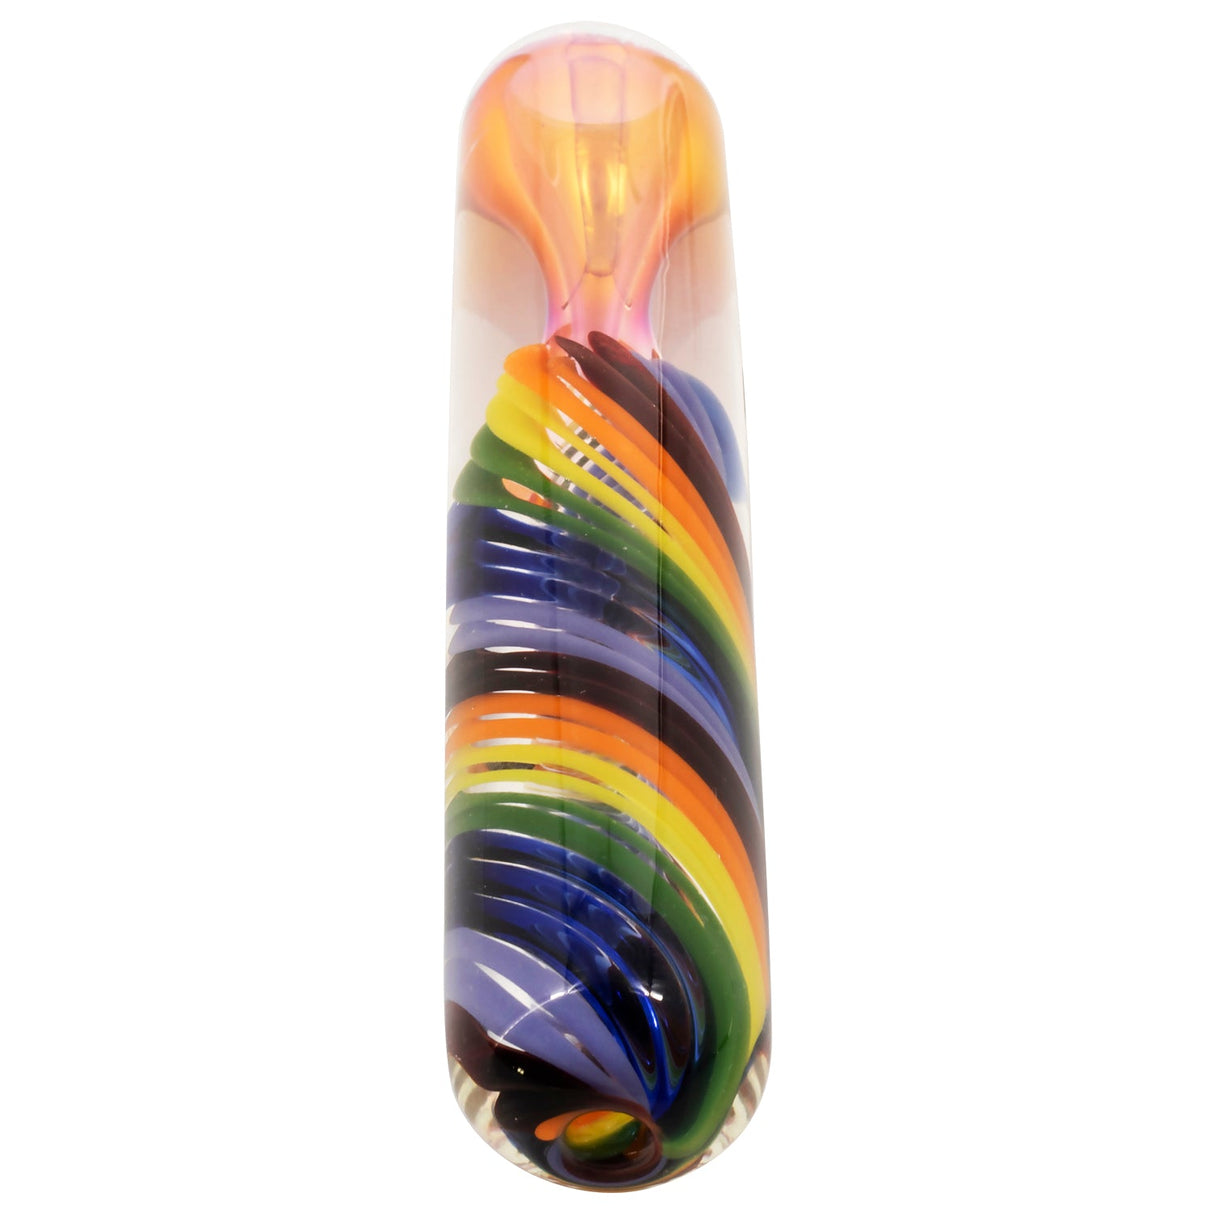 LA Pipes "Twisted Rainbow" Fumed Glass Chillum - Front View with Vibrant Stripes